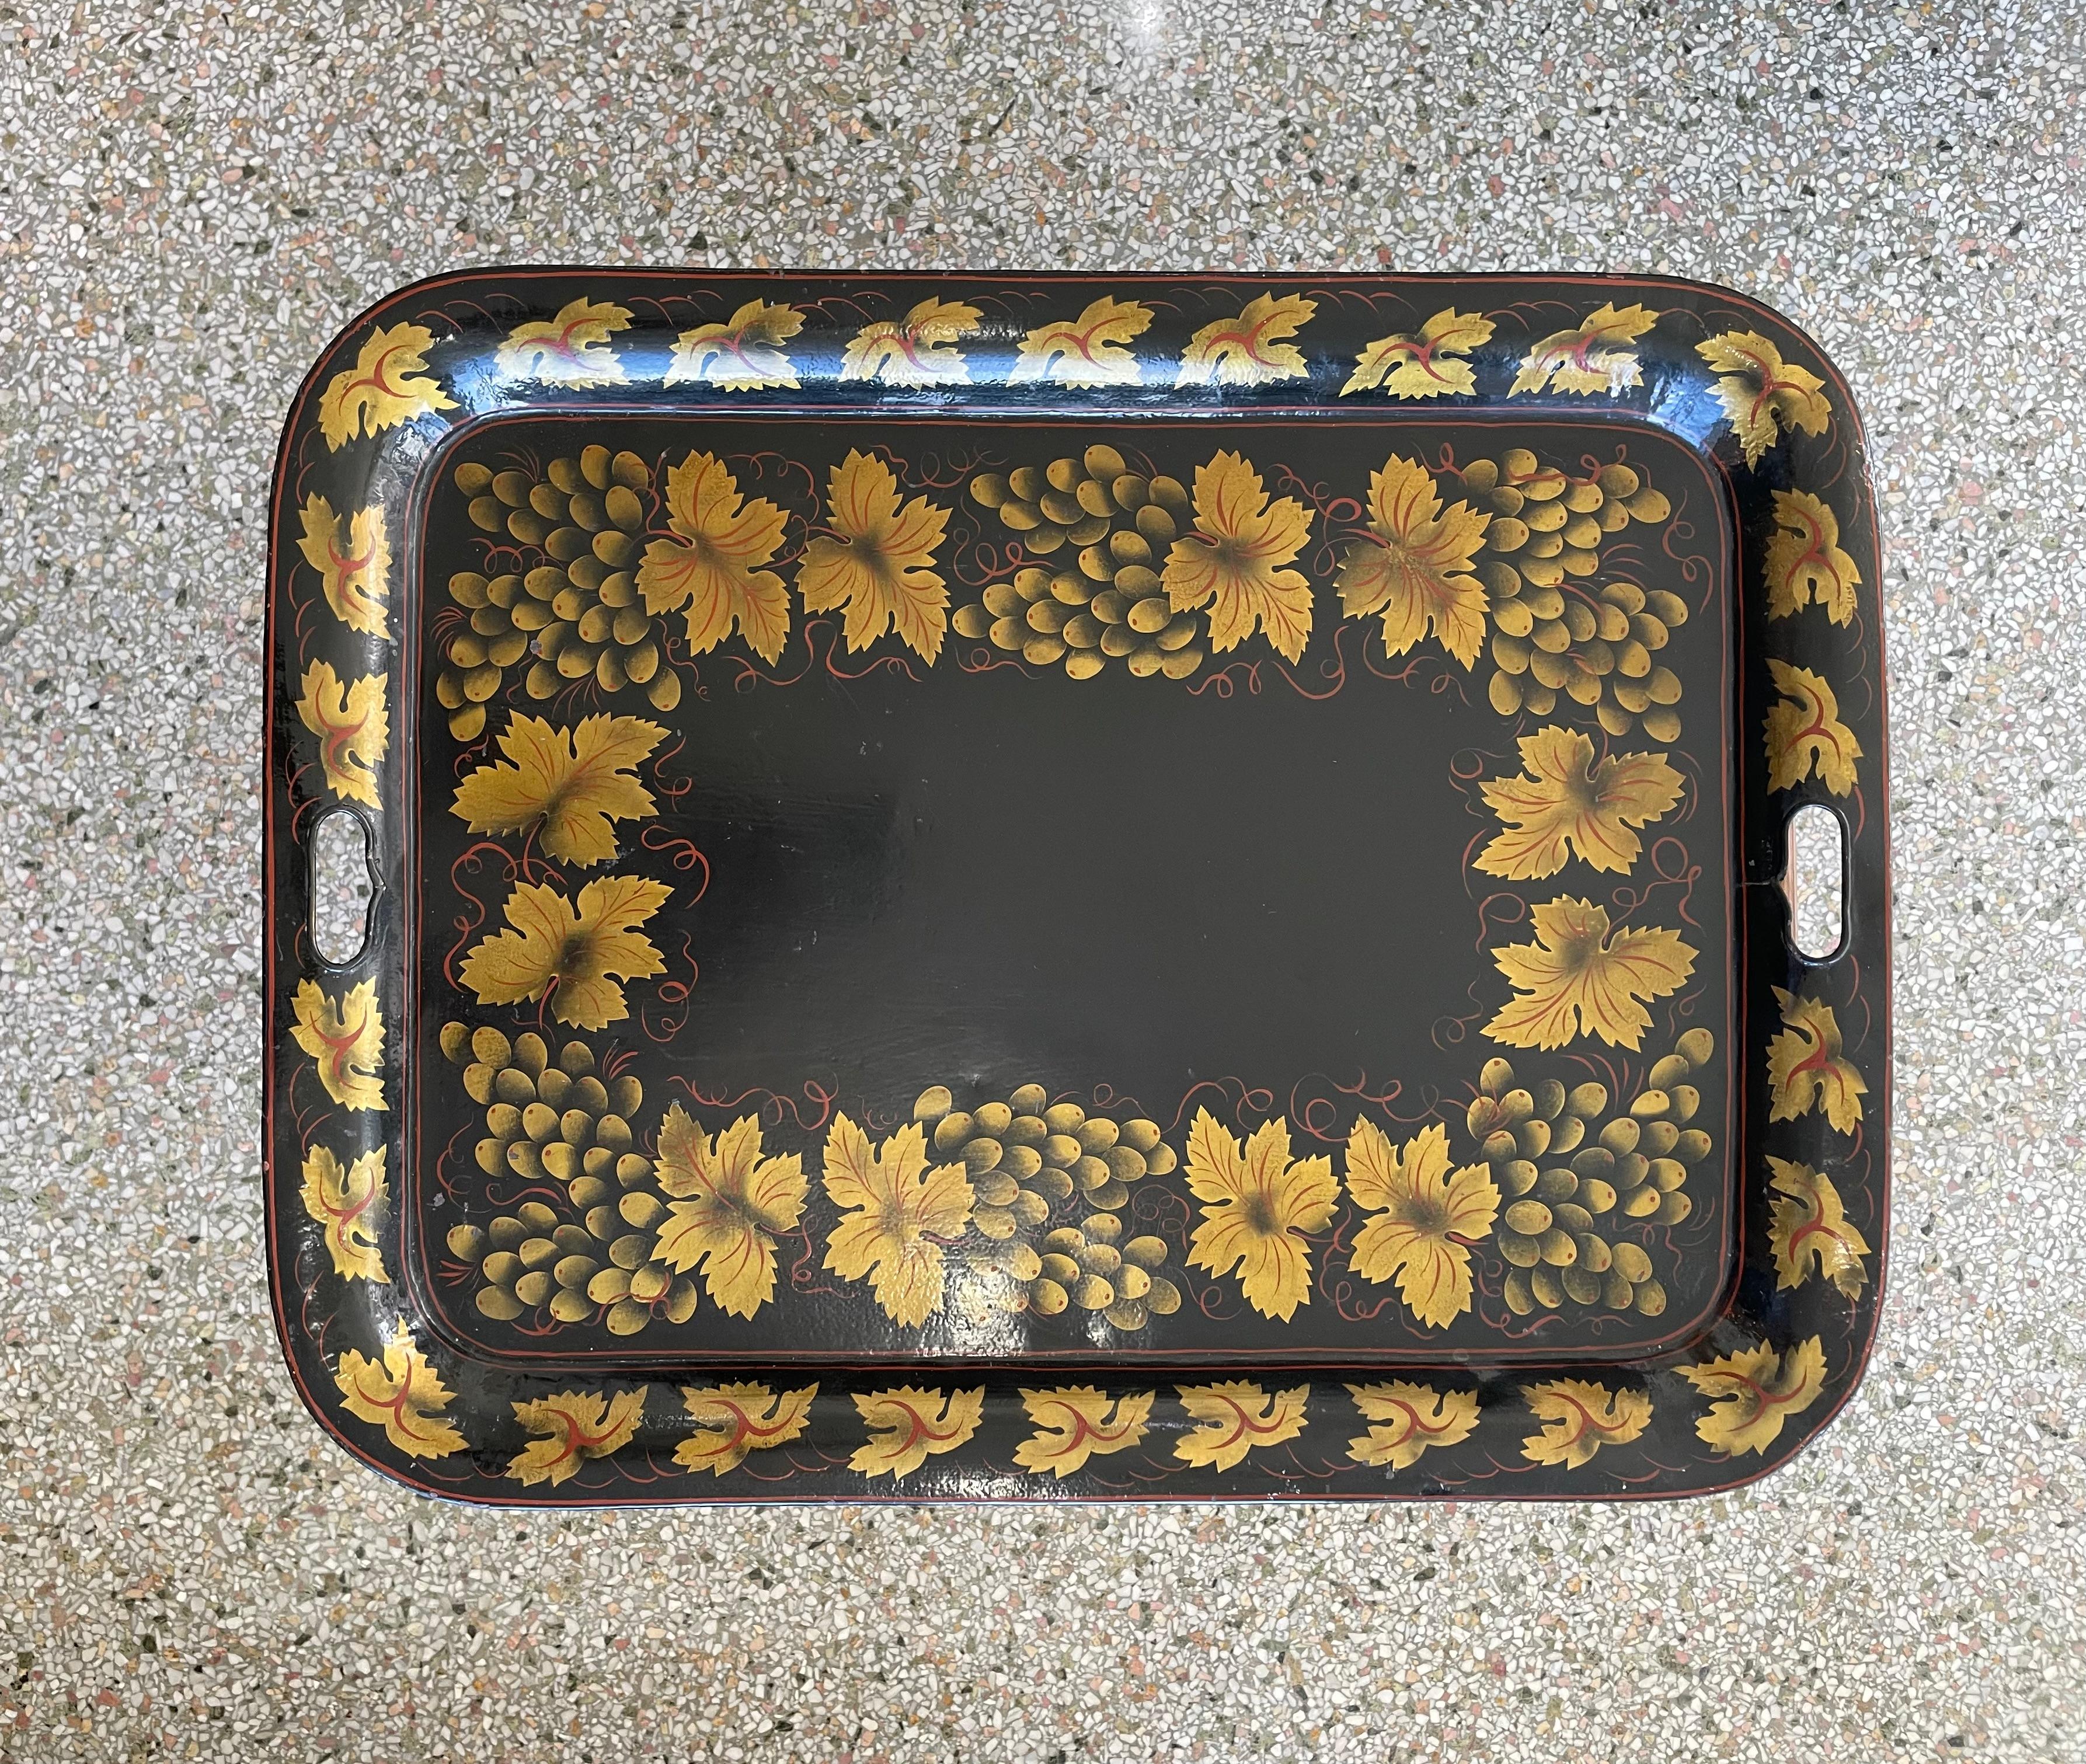 This stylish tole ware tray on stand will make a beautiful statement with its simple form and use of materials.  The tray is not original to the base, and was married at some point in time.  The base most likely originally held an ironstone platter.